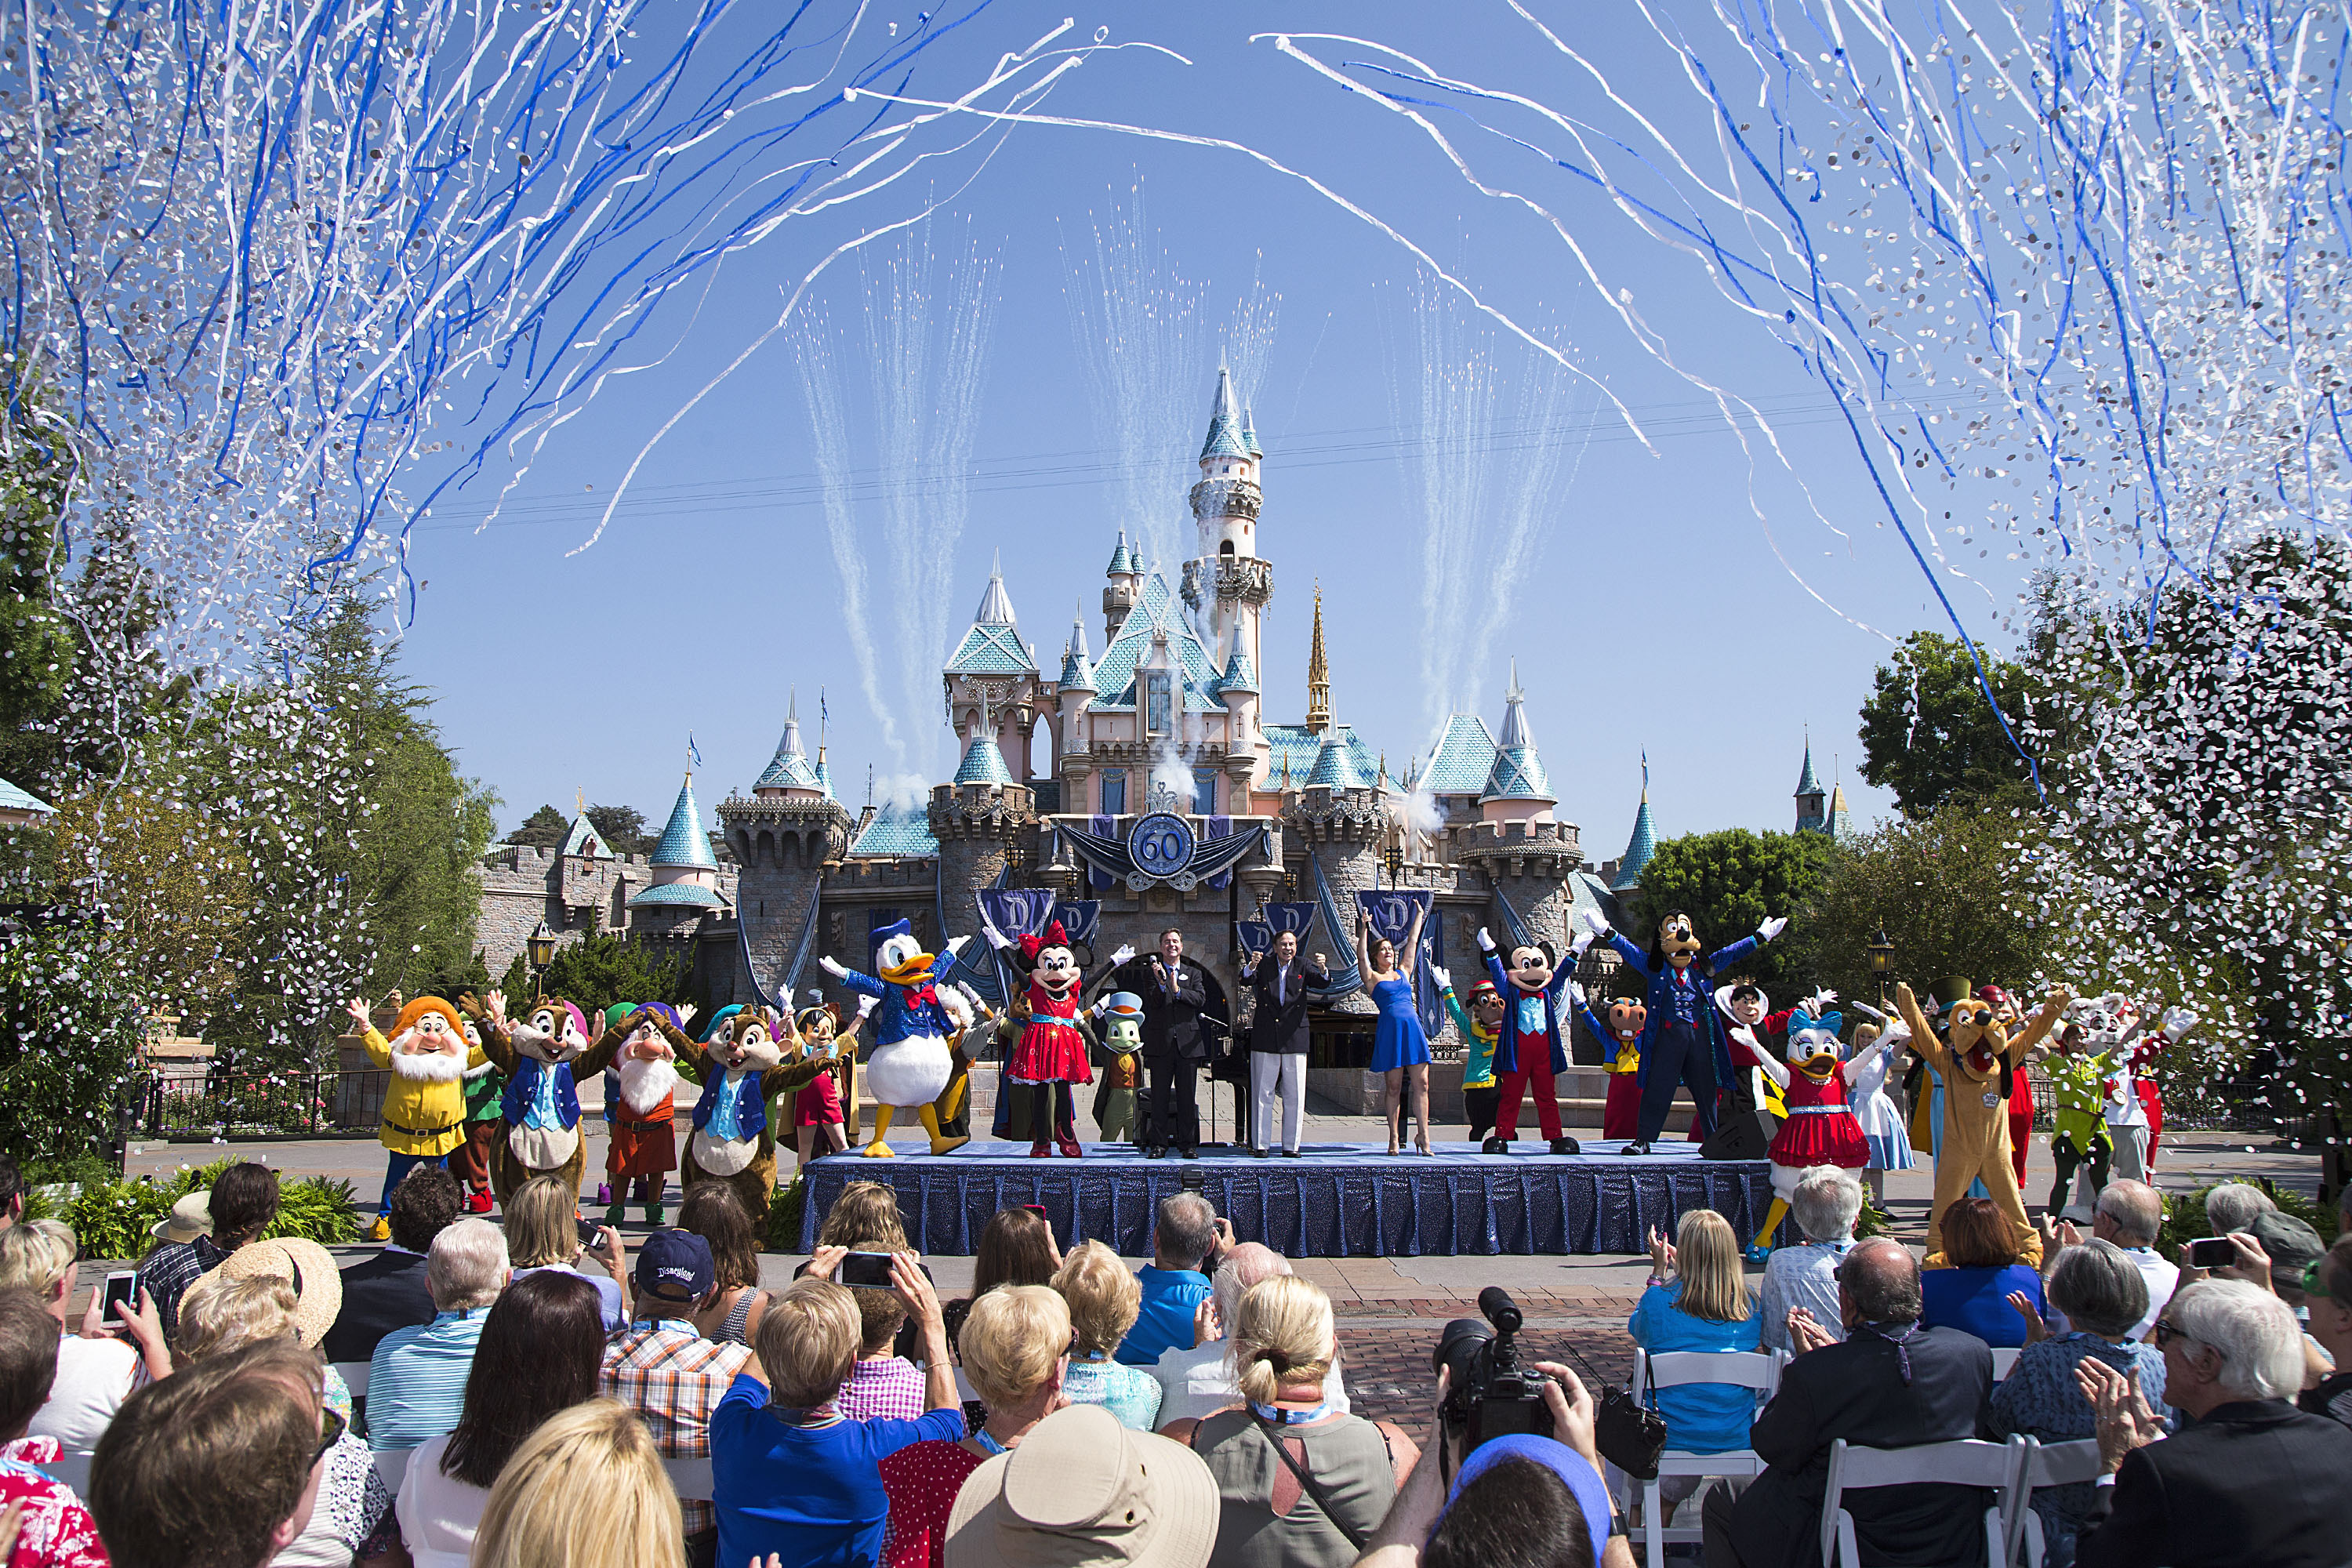 Disney Is Ending Its Vacation Savings Accounts. Here's How to Get Your Money